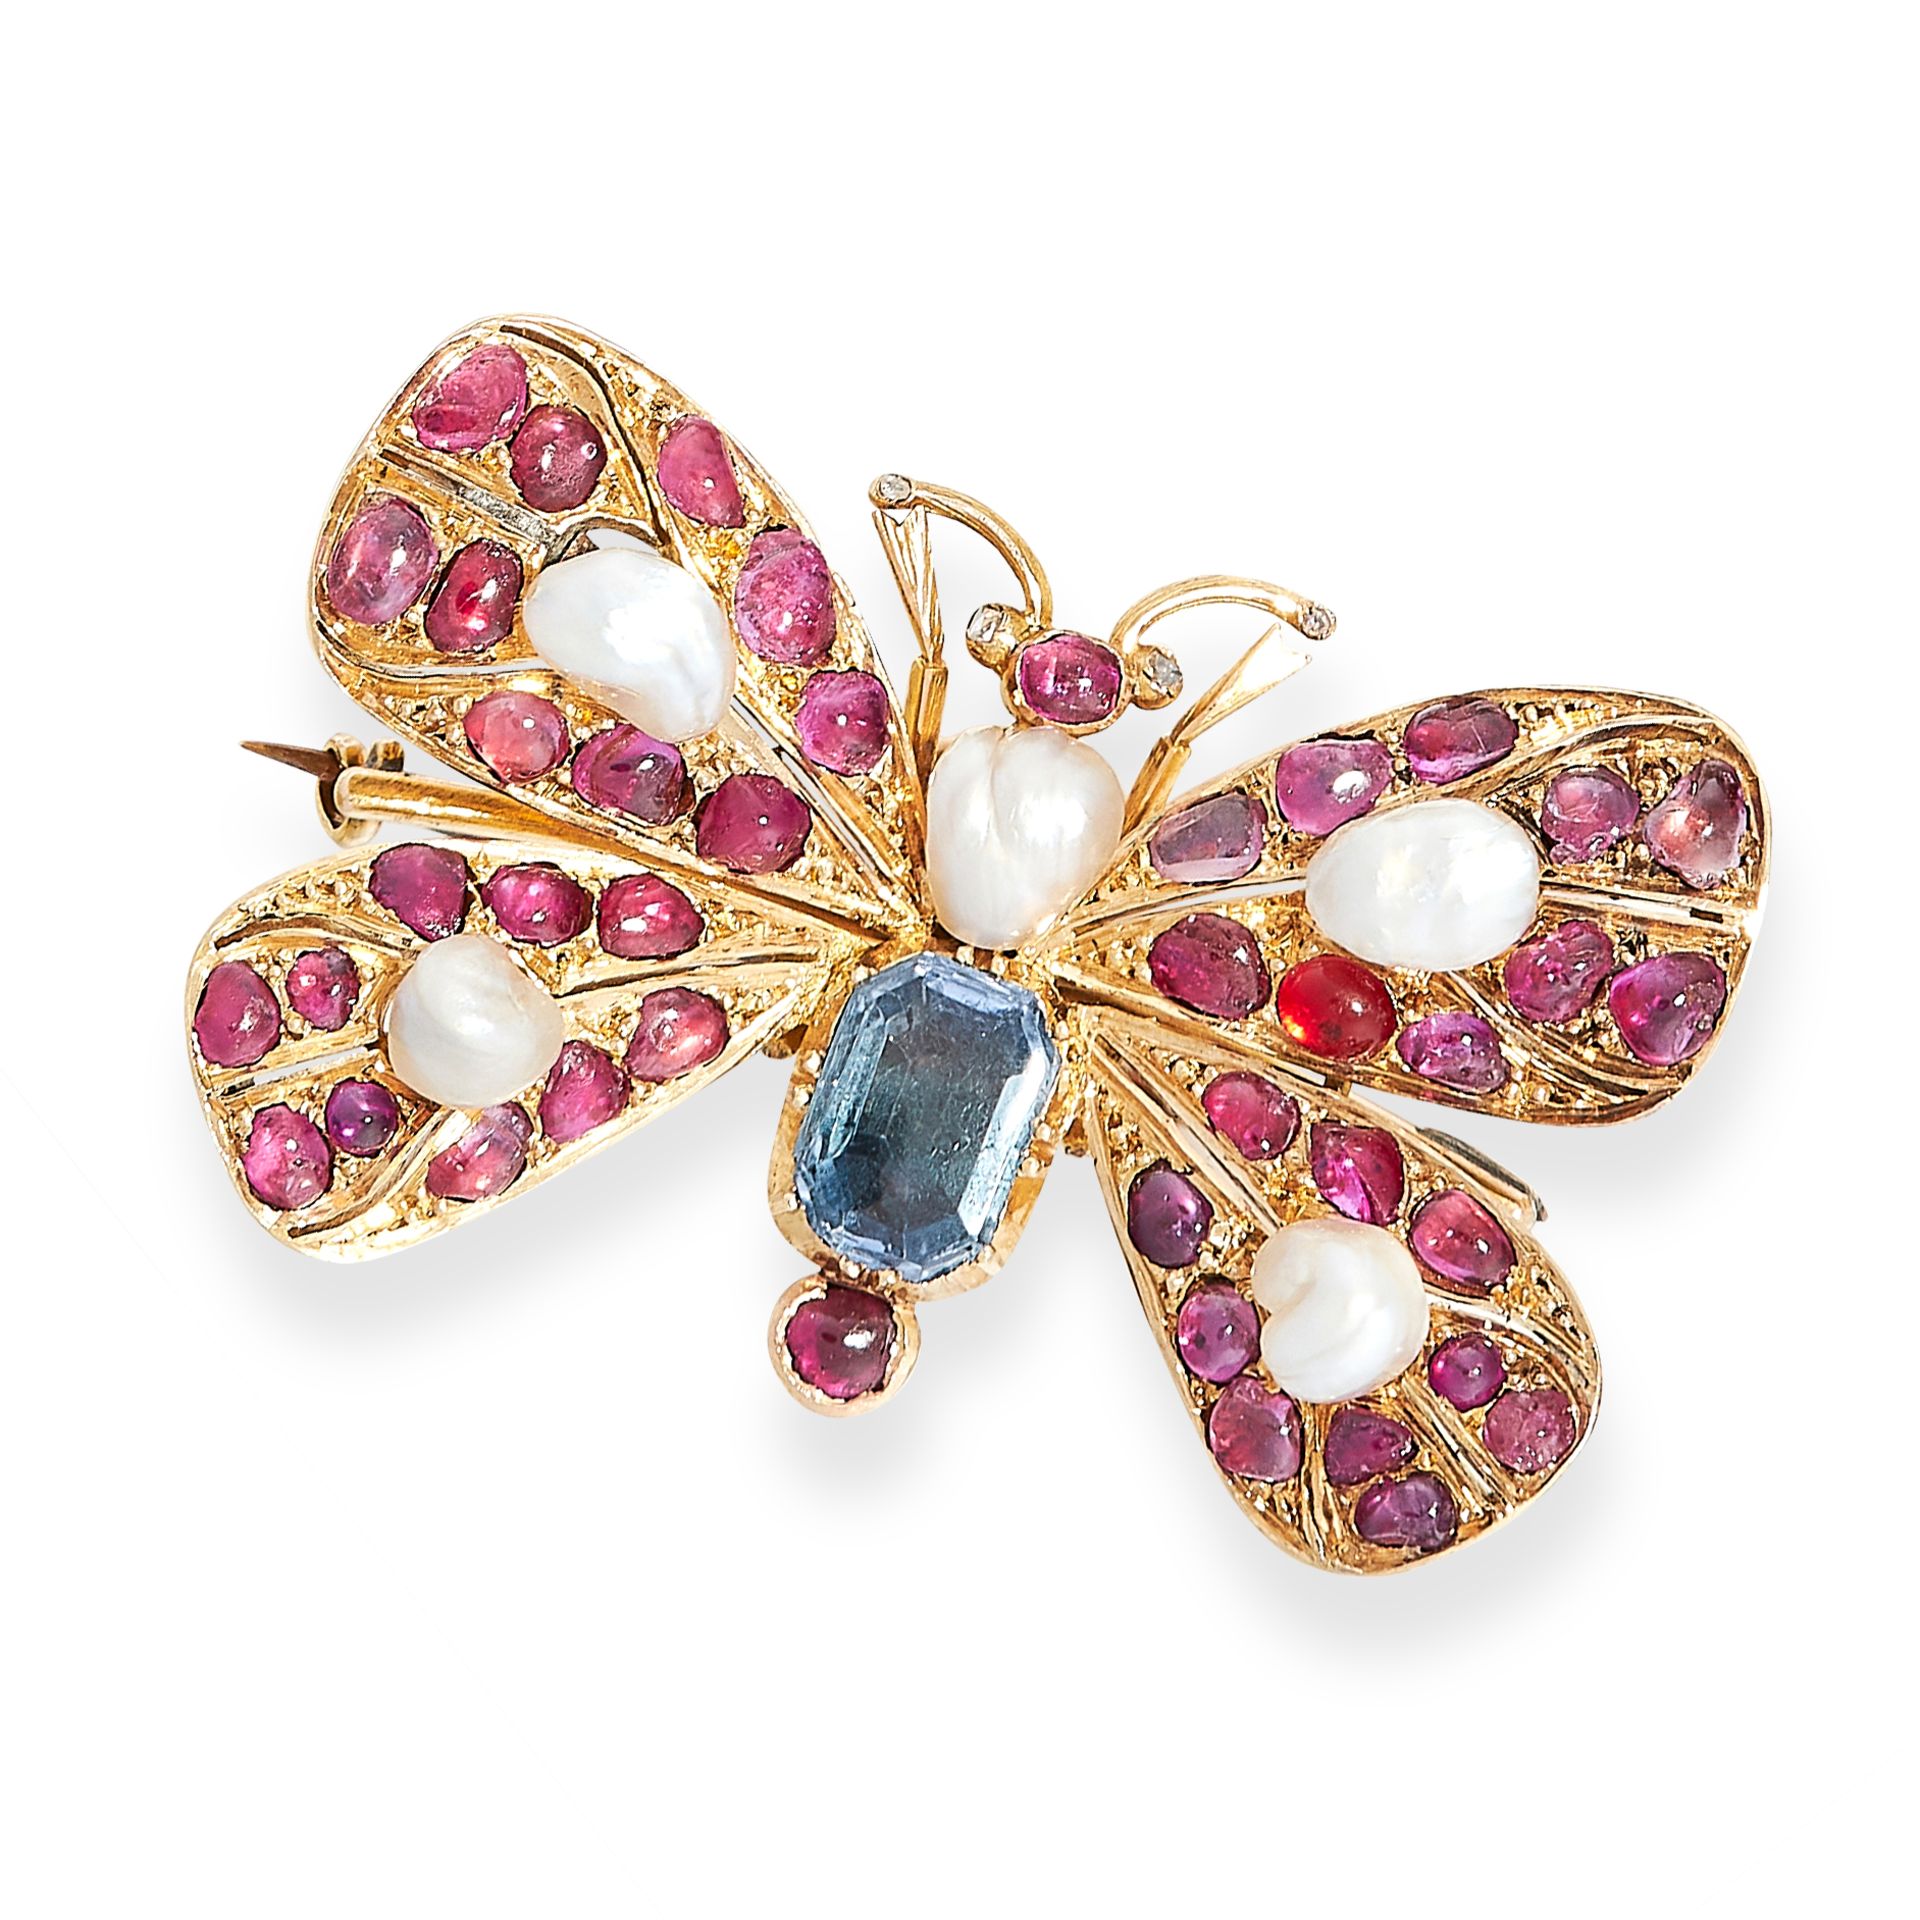 AQUAMARINE, PEARL, DIAMOND AND RUBY BUTTERFLY BROOCH set with a step cut aquamarine, pearls, rose